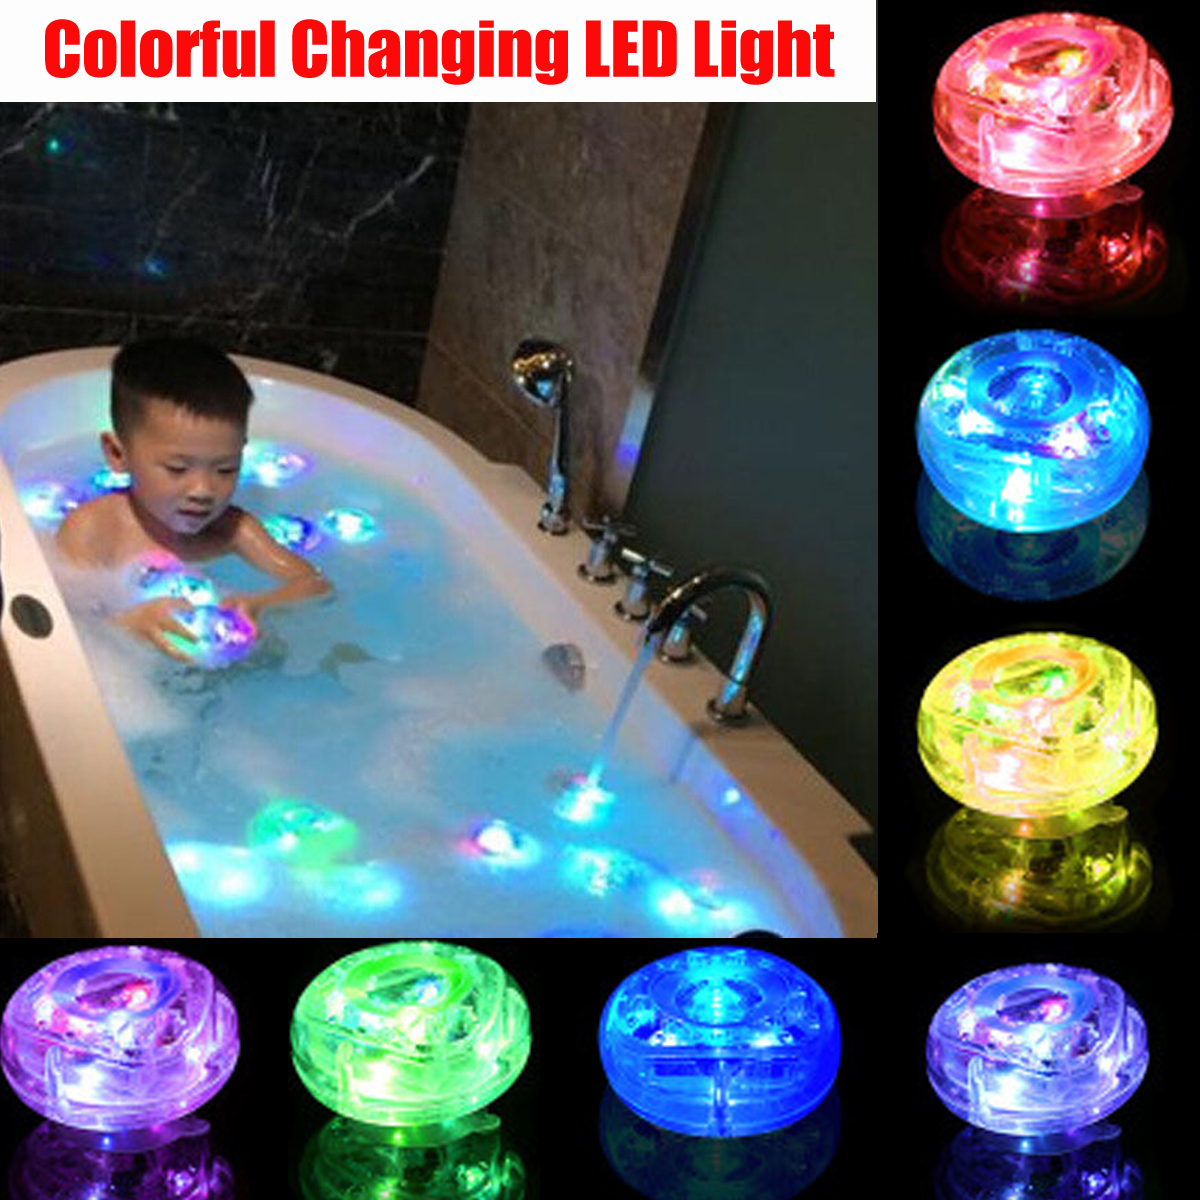 Waterproof-Bathroom-Tub-Baby-Shower-Bath-Time-Changing-Kids-Fun-Party-LED-Light-RGB-Colors-Toys-1640672-1